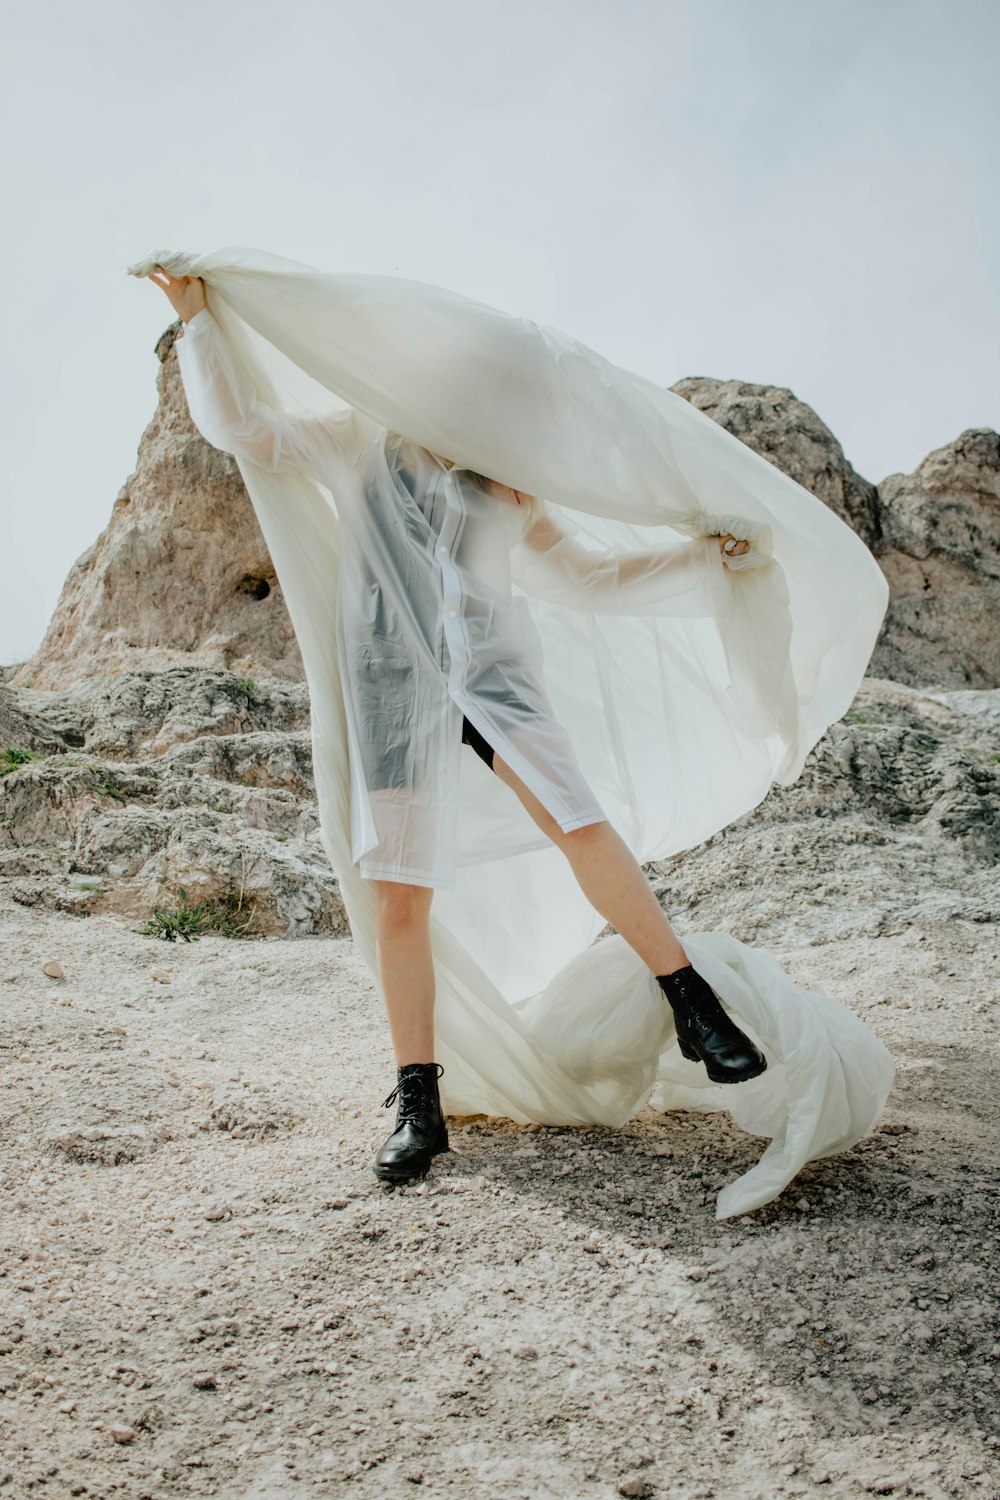 woman in white wedding dress and black boots standing on rocky ground during daytime